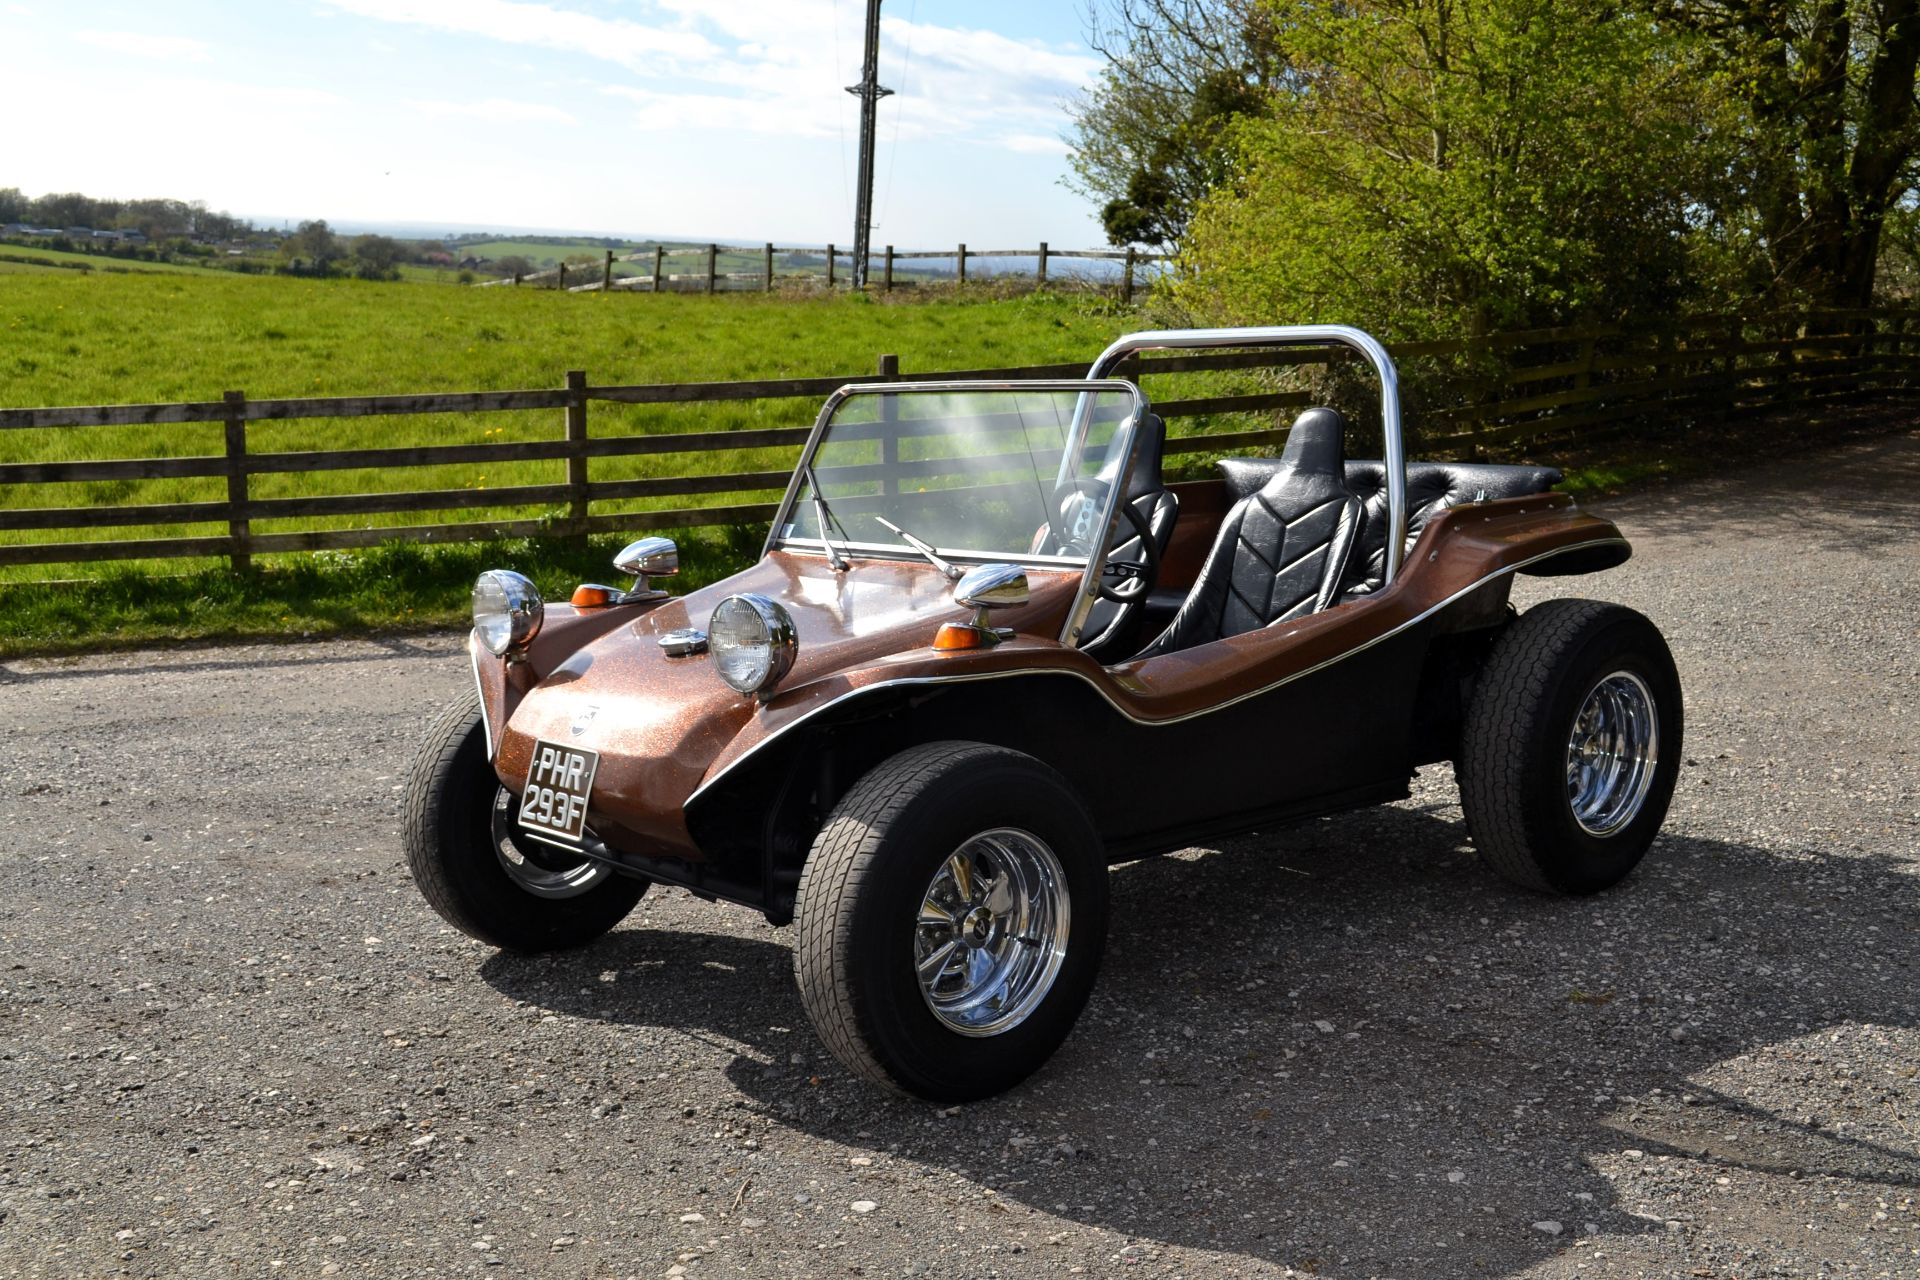 1968 Volkswagen Beach Buggy SWB ‘Meyers Manx Evocation’ No Reserve - Image 7 of 29